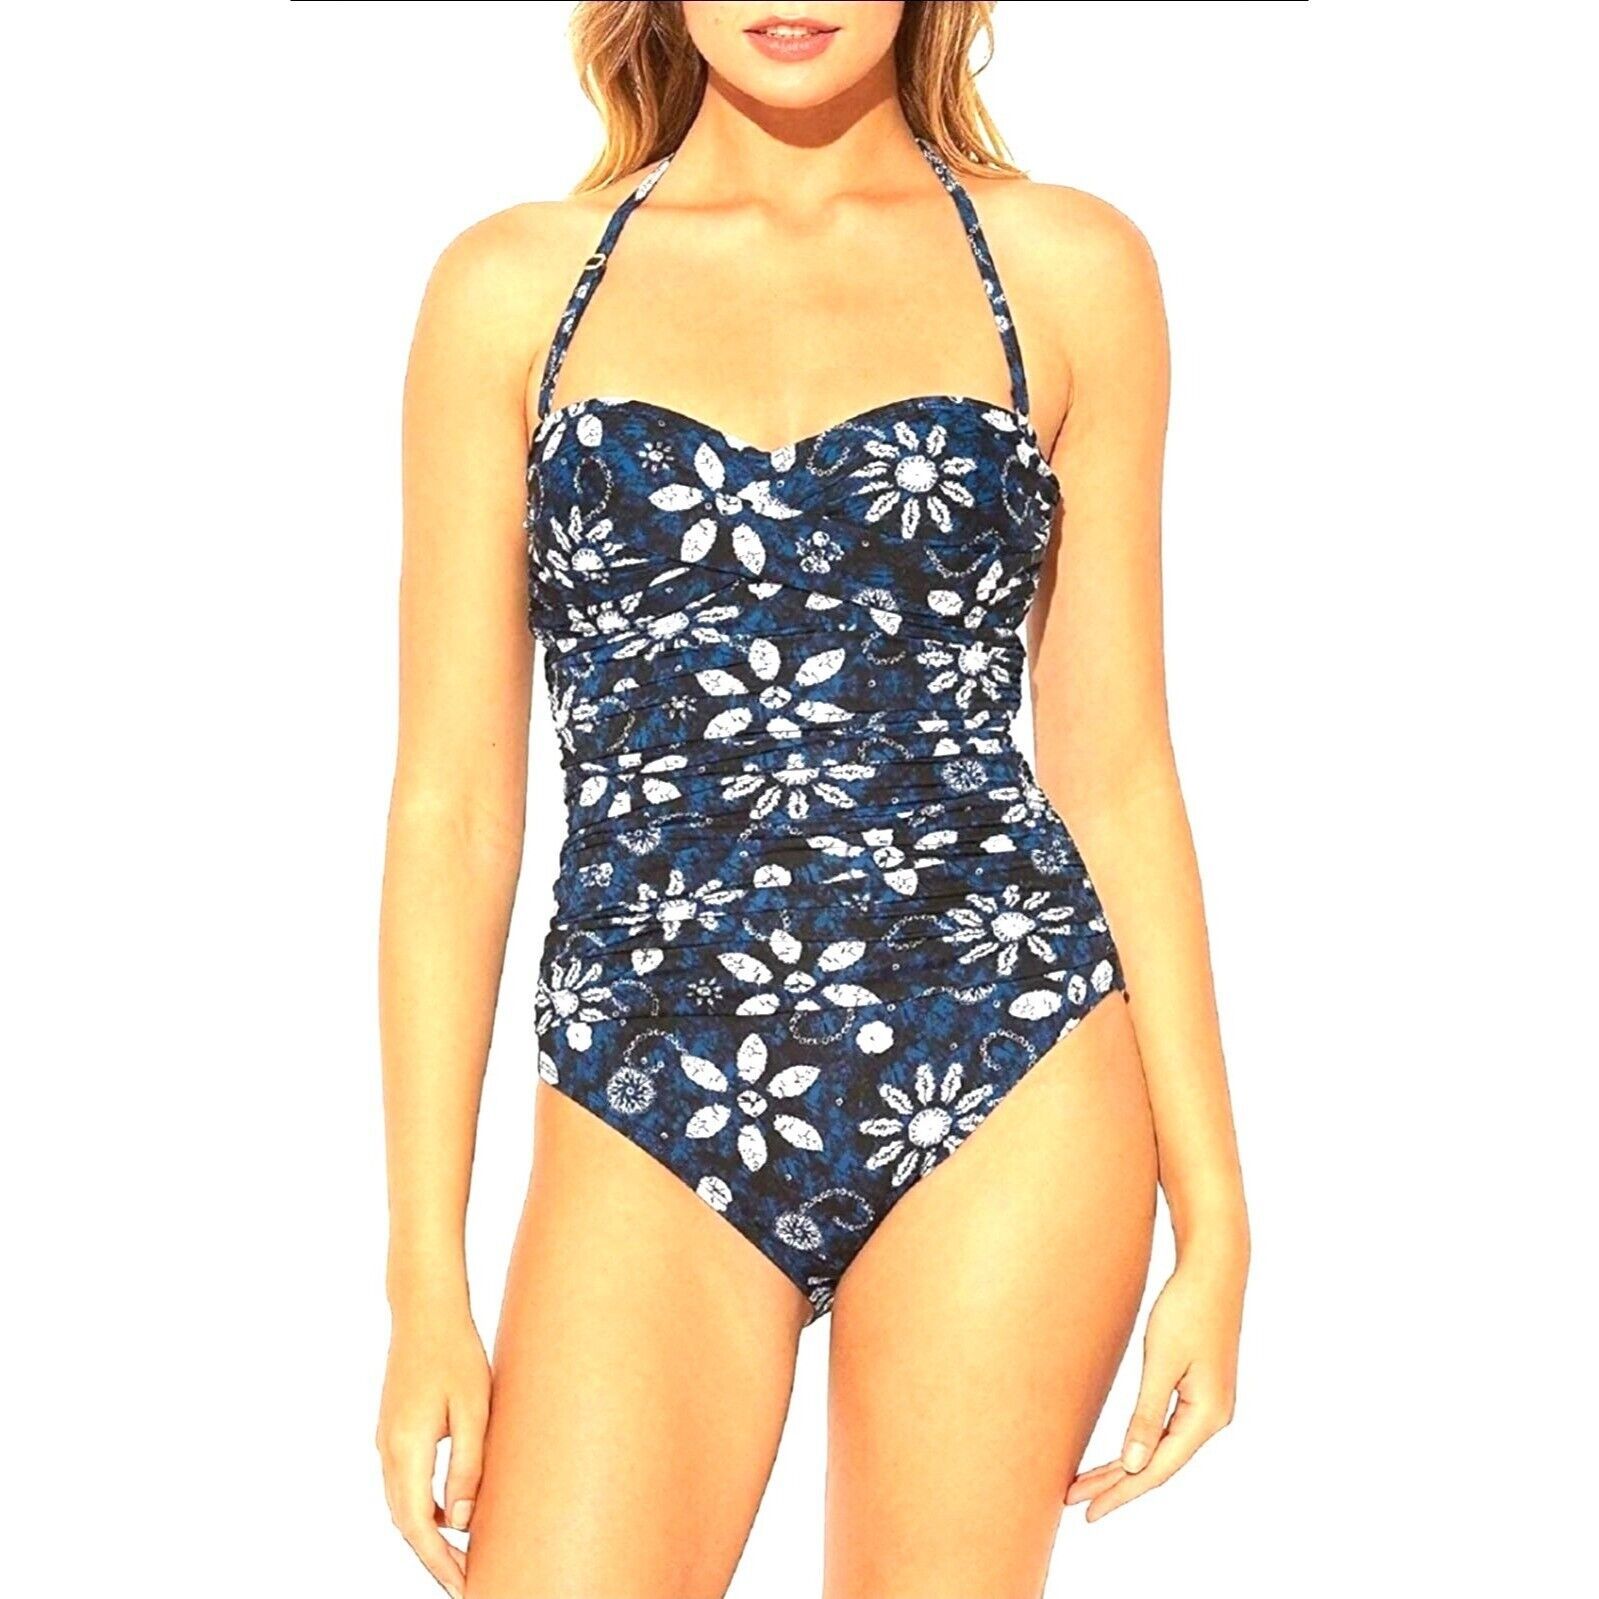 Primary image for BLEU ROD BEATTIE Swimwear Floral Take A Dip Convertible One-piece Bathing Suit